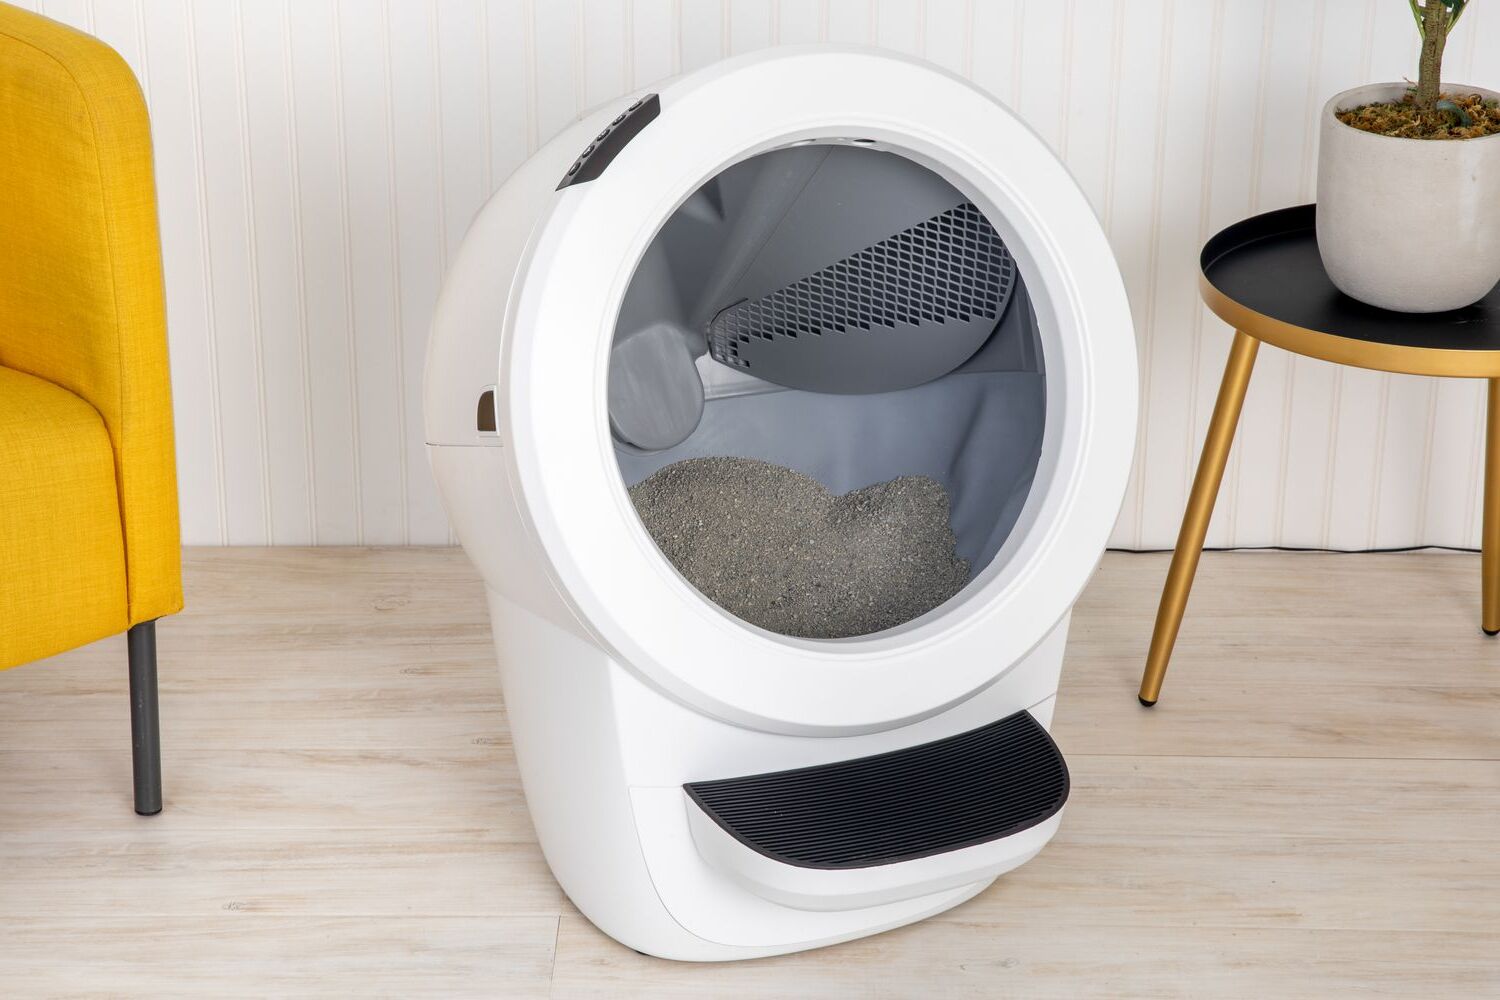 What Is The Best Self-Cleaning Litter Box For Cats